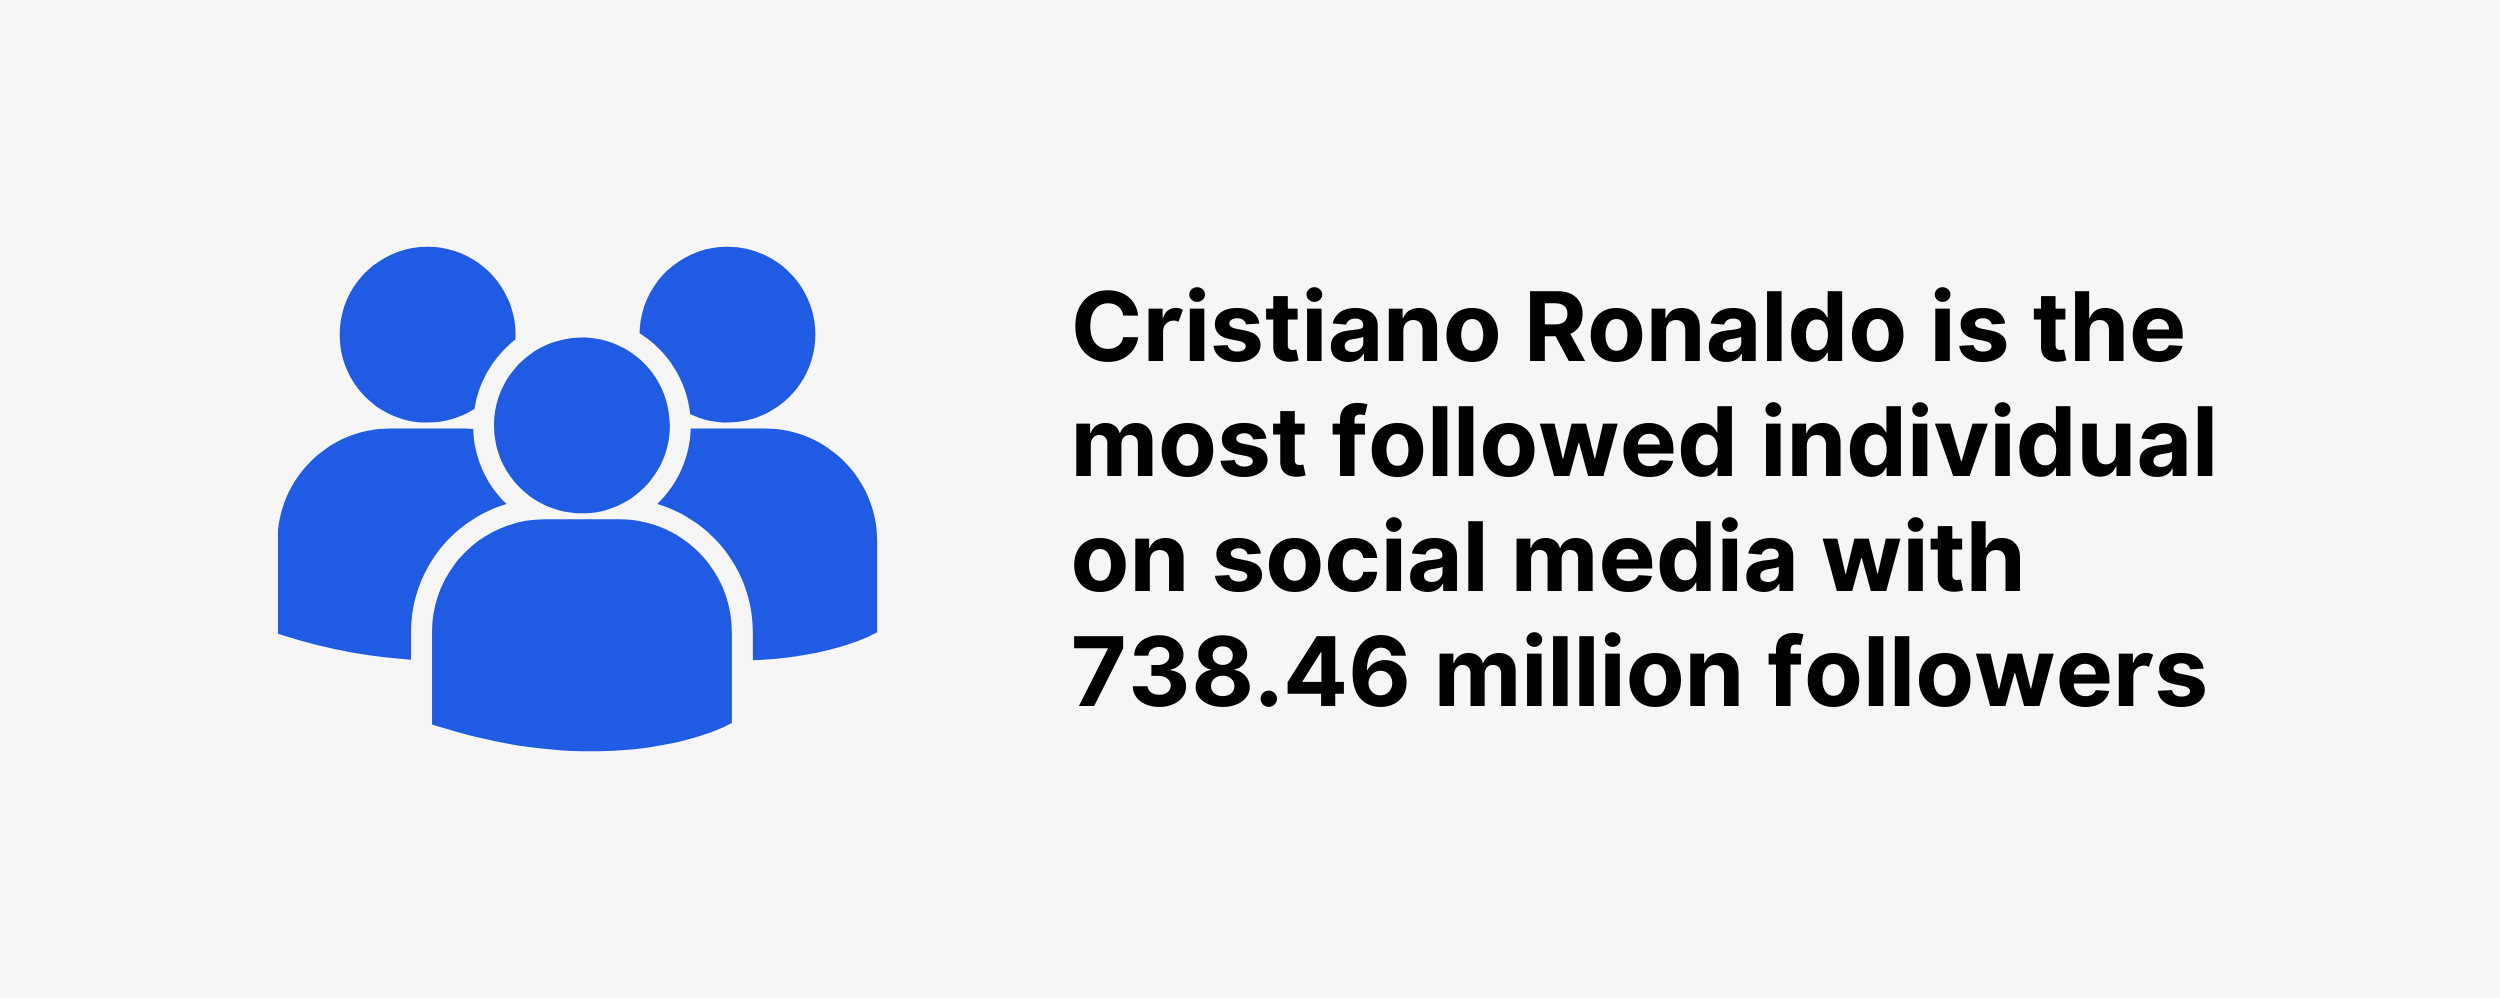 Cristiano Ronaldo is the most followed individual on social media with 738.46 million followers